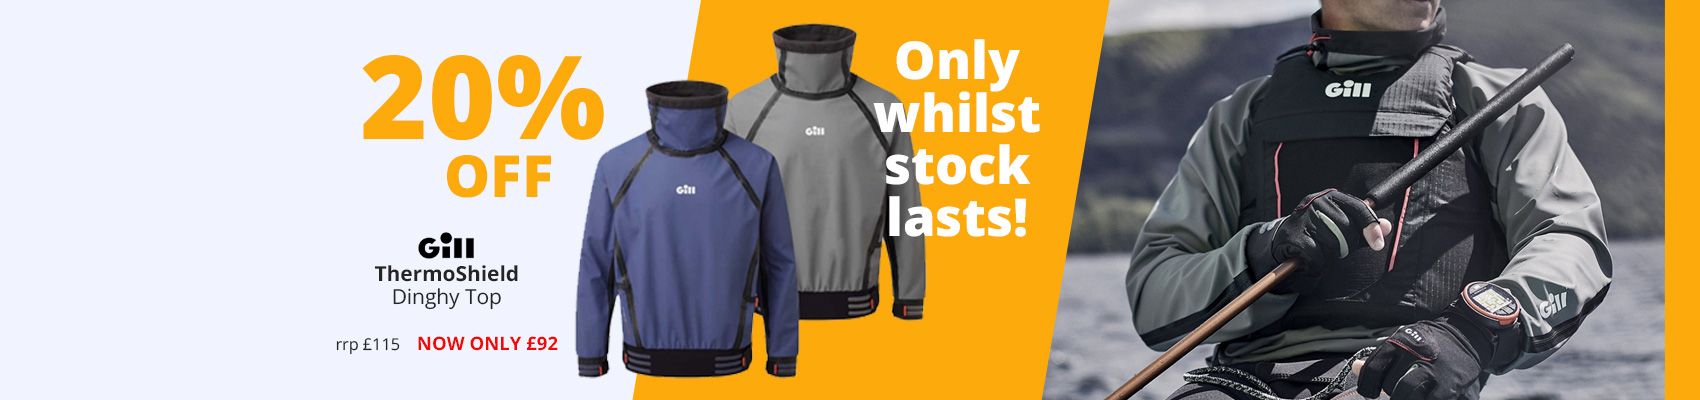 Thermoshield offer